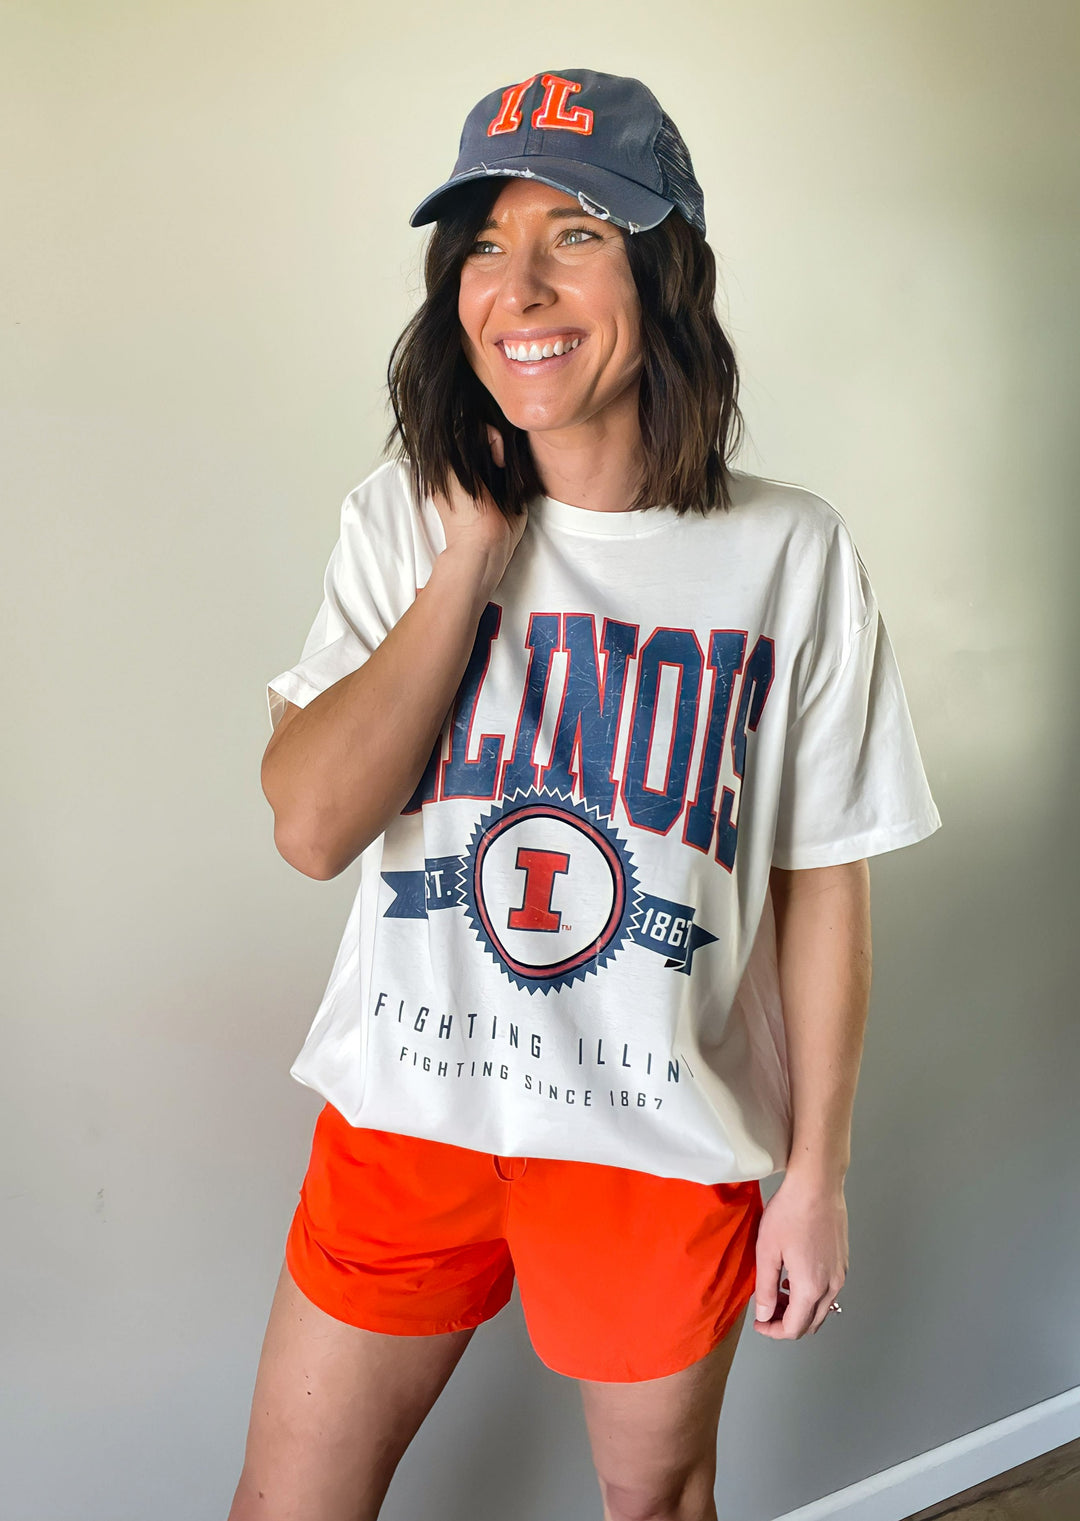 This Illinois Ivory Oversized Tee features an oversized fit just as the title says. Text graphics state "ILLINOIS" across the top chest in a light blue distressed lettering with an orange outline followed by an Illinois emblem with "Est. 1867". "FIGHTING ILLINI | FIGHTING SINCE 1867" stated across the bottom of the shirt and light blue. The short sleeves and crew neck add a classic touch, making it easy to wear with a variety of outfits.